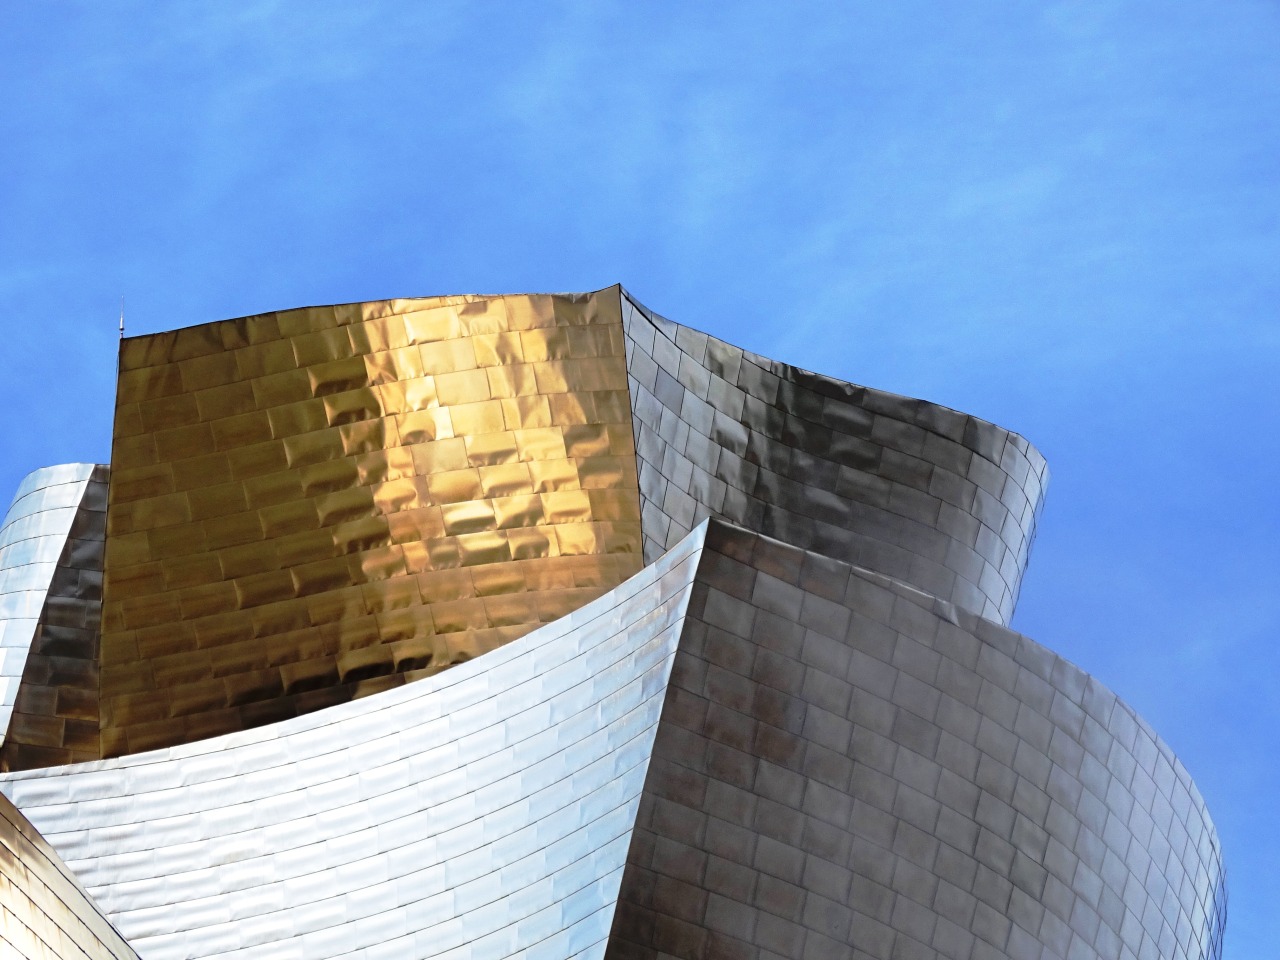 Clouds (No. 701)Bilbao, Spain #Bilbao #Guggenheim Museum Bilbao  #Frank O. Gehry #Frank Gehry#travel#architecture#façade #I really love the first pic #cityscape#tourist attraction#landmark#stainless steel#exterior#summer 2020 #province of Biscay #Spain#Basque Country#España#Northern Spain#Southern Europe#original photography